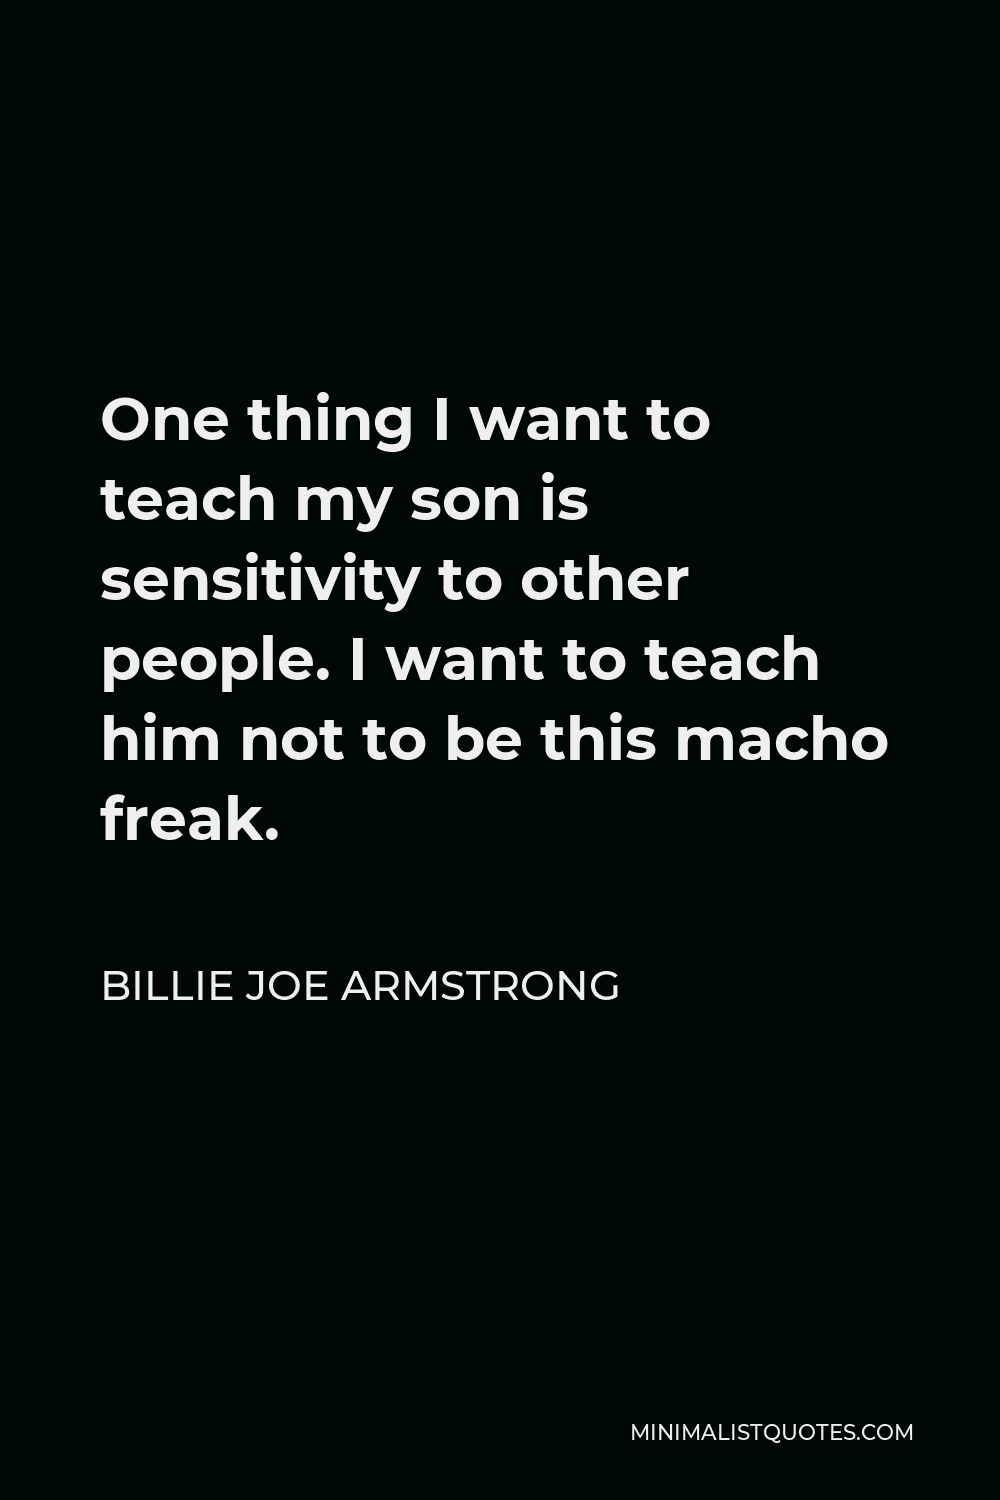 Billie Joe Armstrong Quote - One thing I want to teach my son is sensitivity to other people. I want to teach him not to be this macho freak.